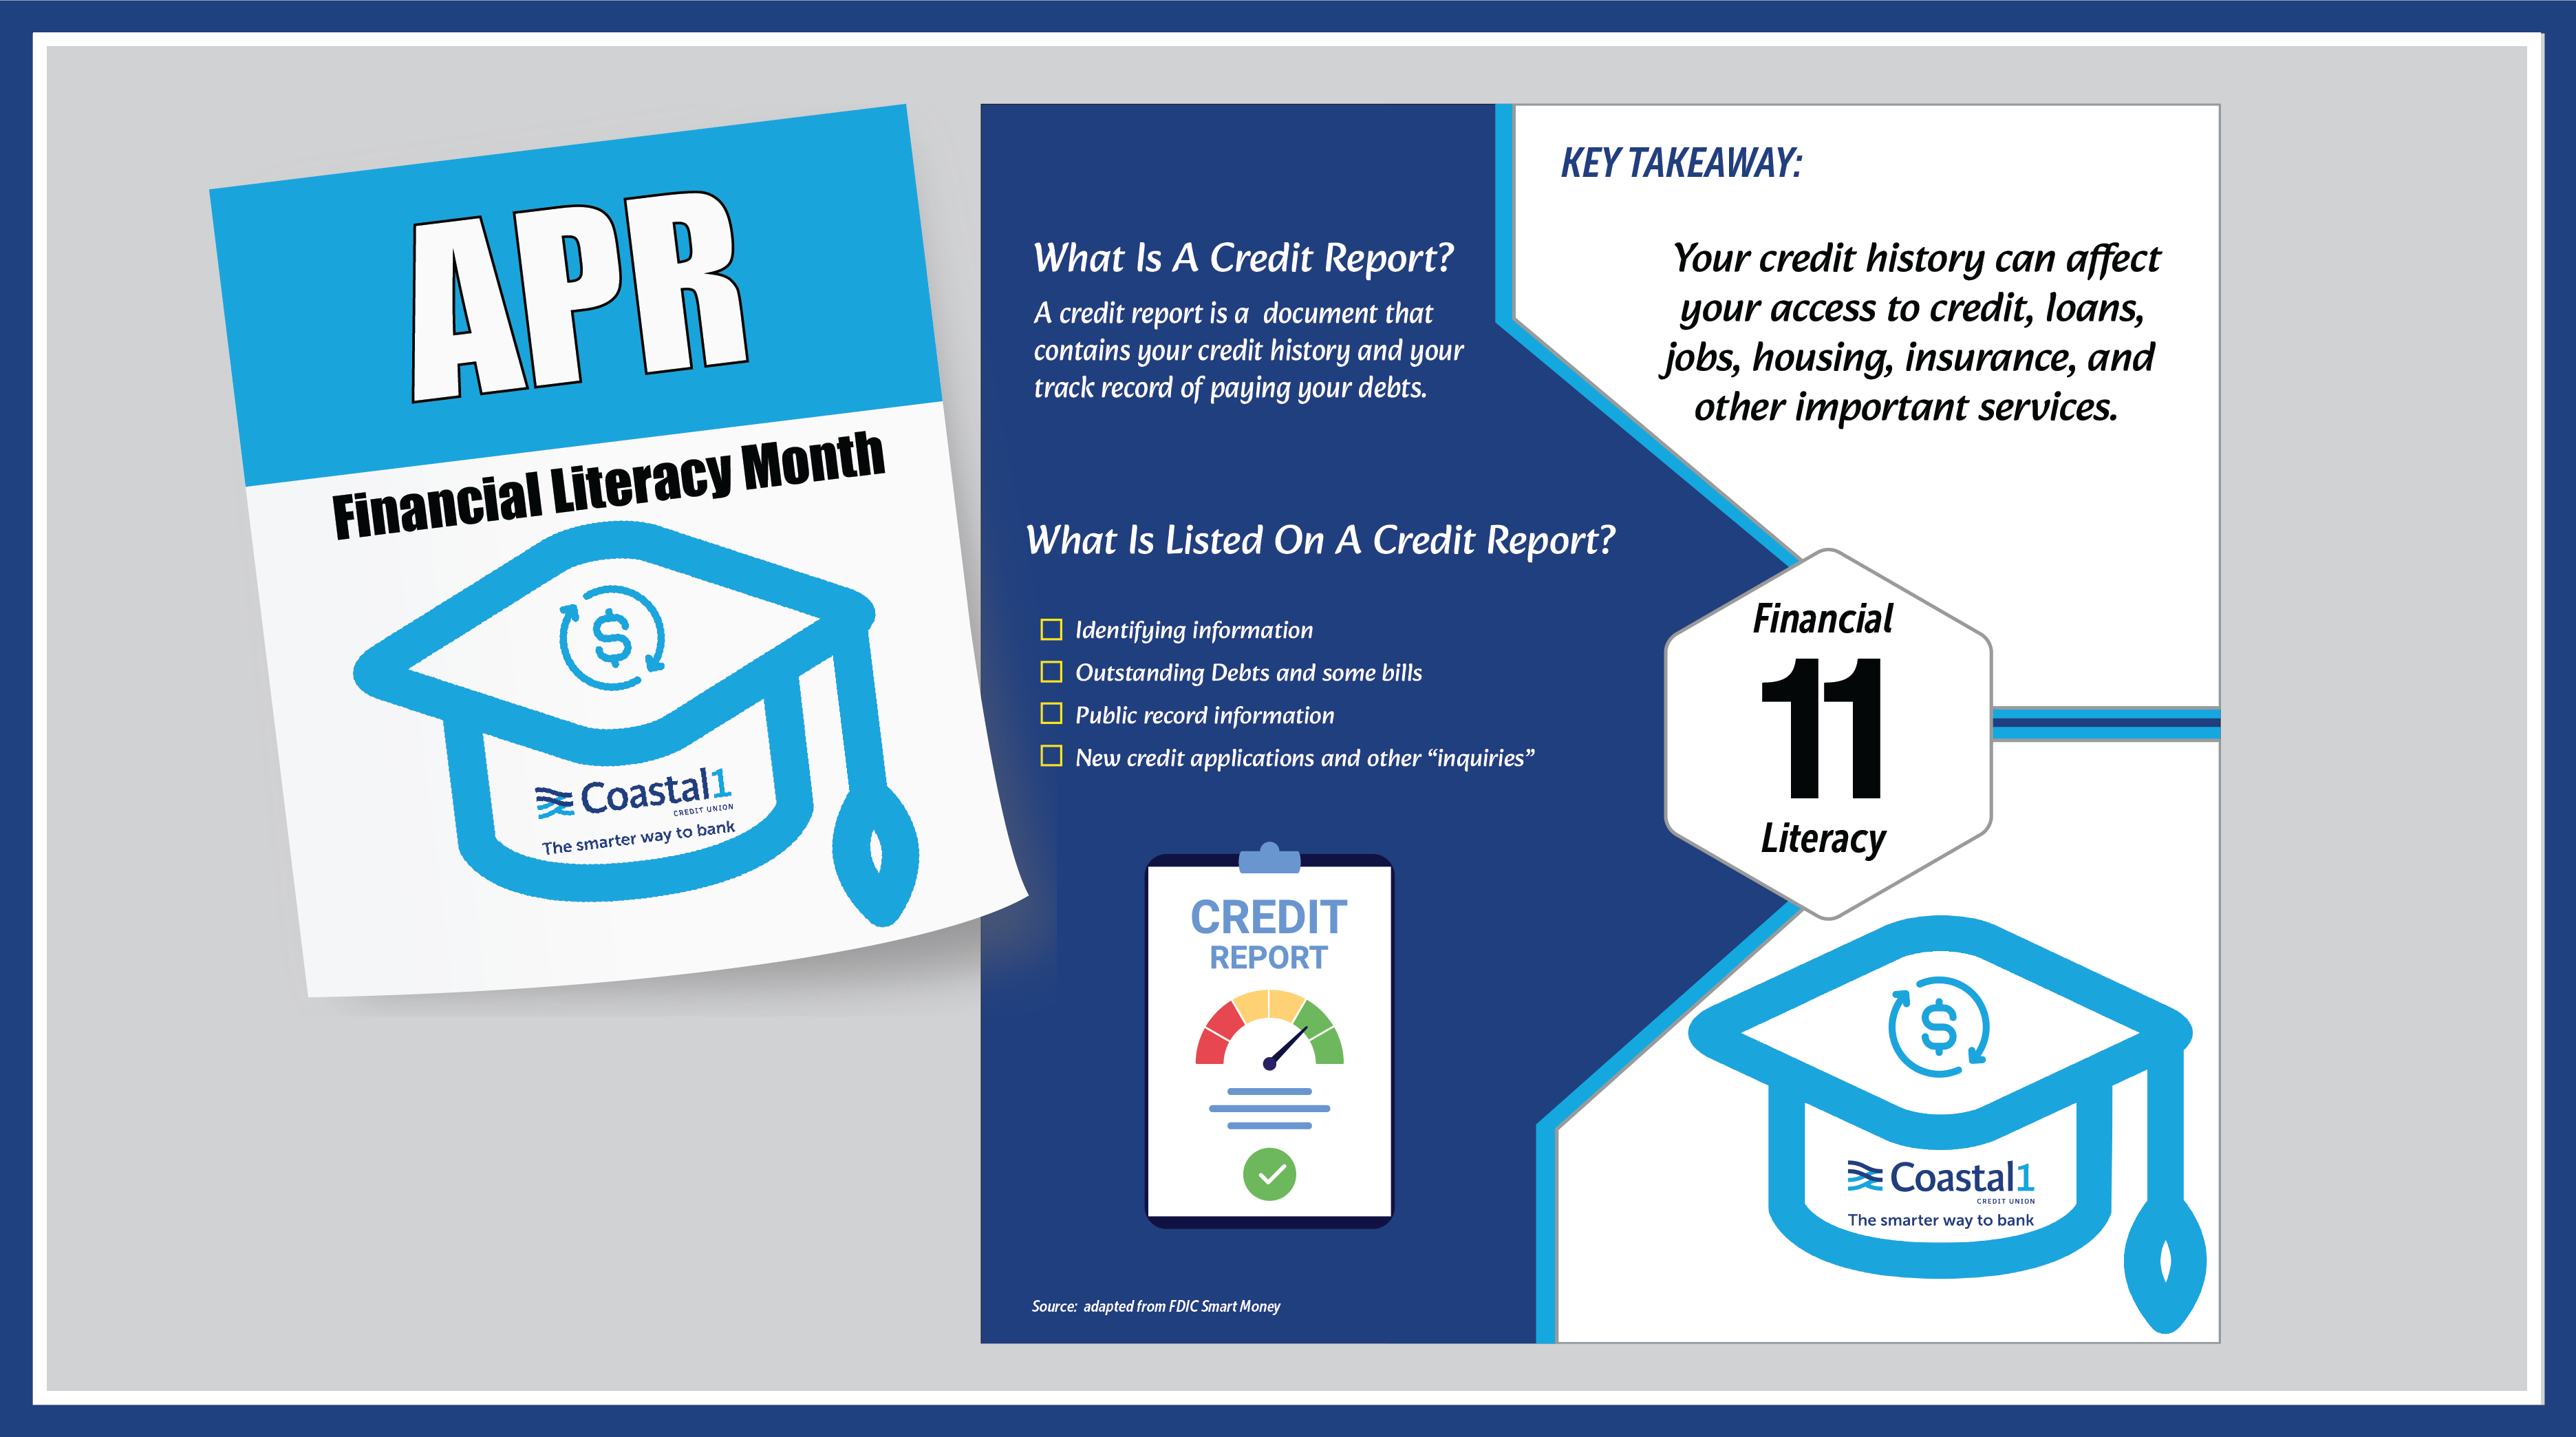 Key Takeaway: Your credit history can affect your access to credit, loans, jobs, housing, insurance, and other important services. What Is A Credit Report? A credit report is a document that contains your credit history and your track record of paying your debts.​ What Is Listed On A Credit Report? • Identifying information • Outstanding Debts and some bills • Public record information • New credit applications and other “inquiries”